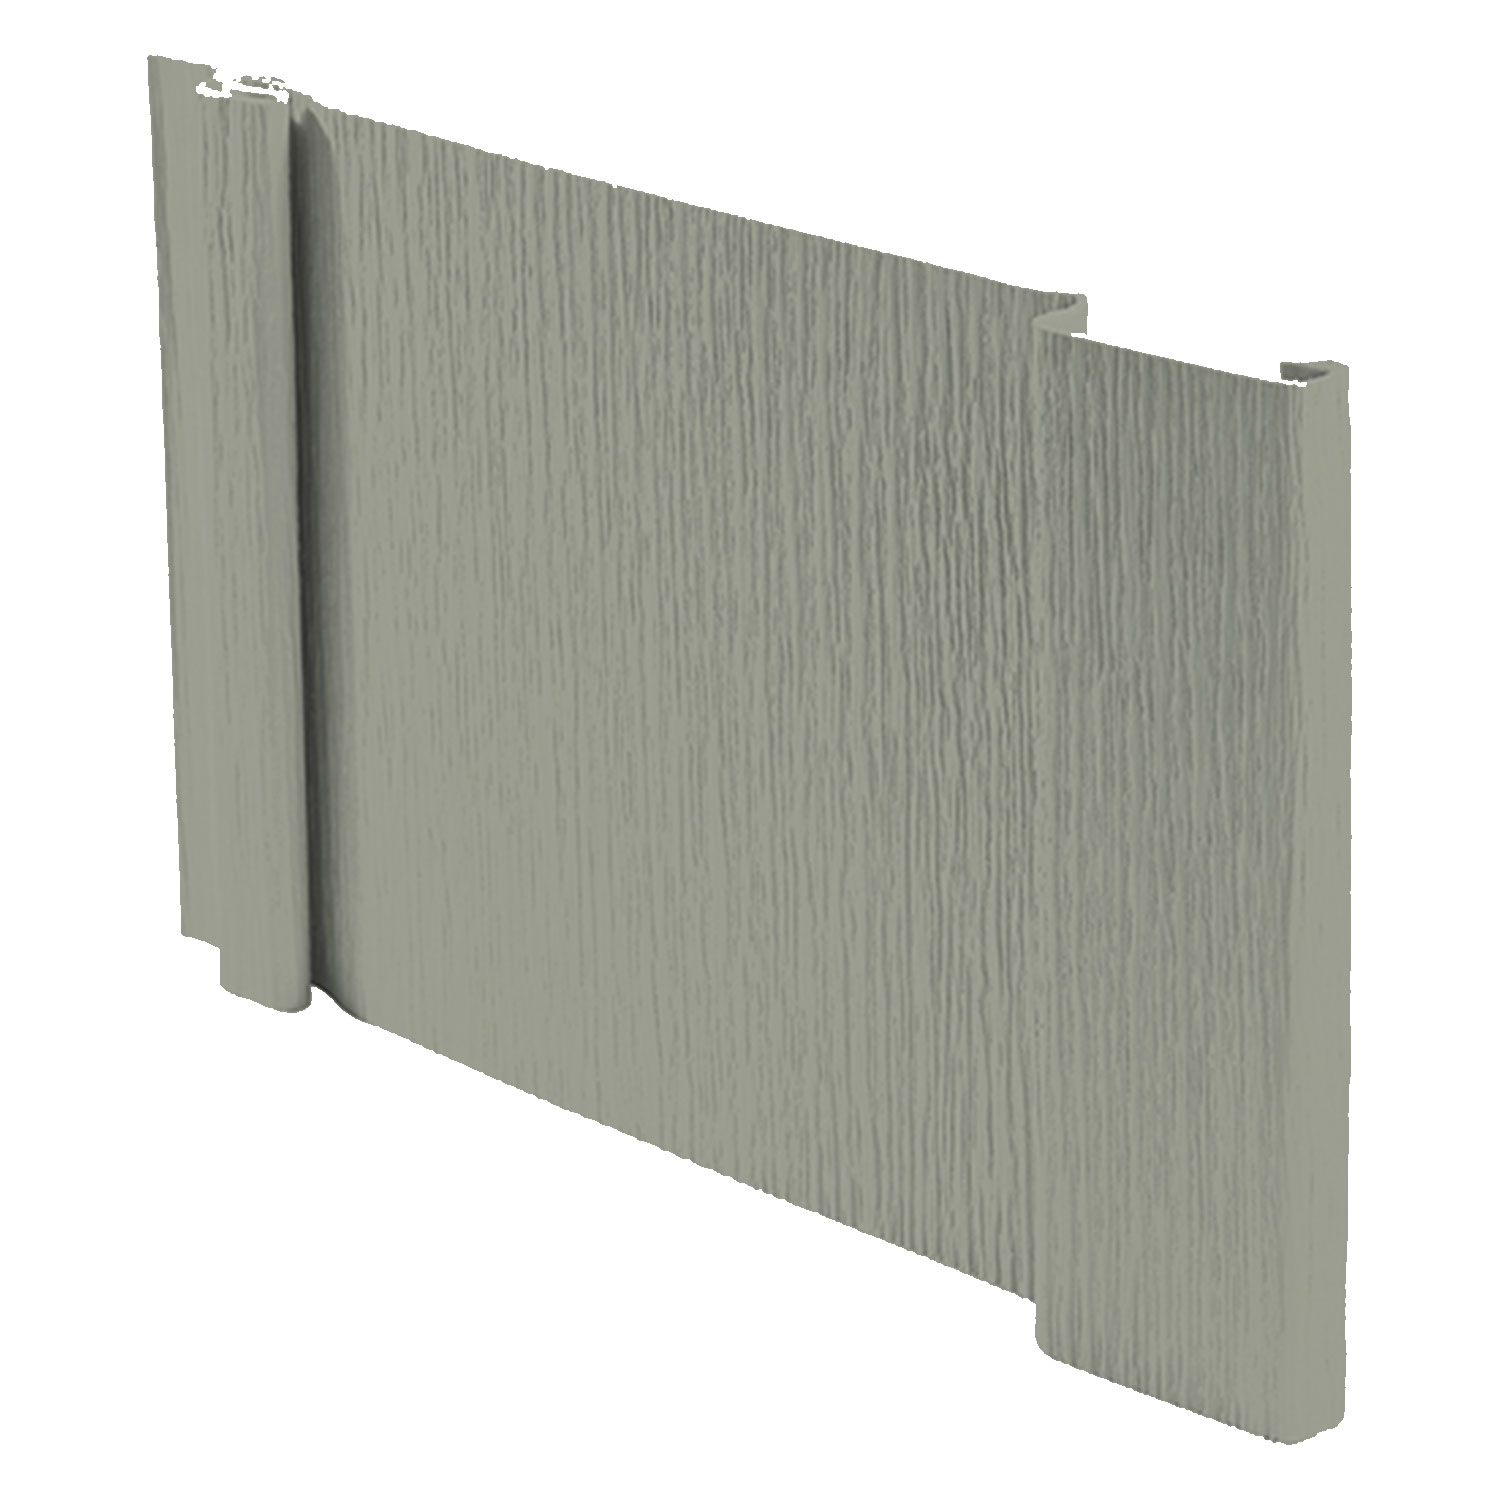 Soft Willow Board Siding